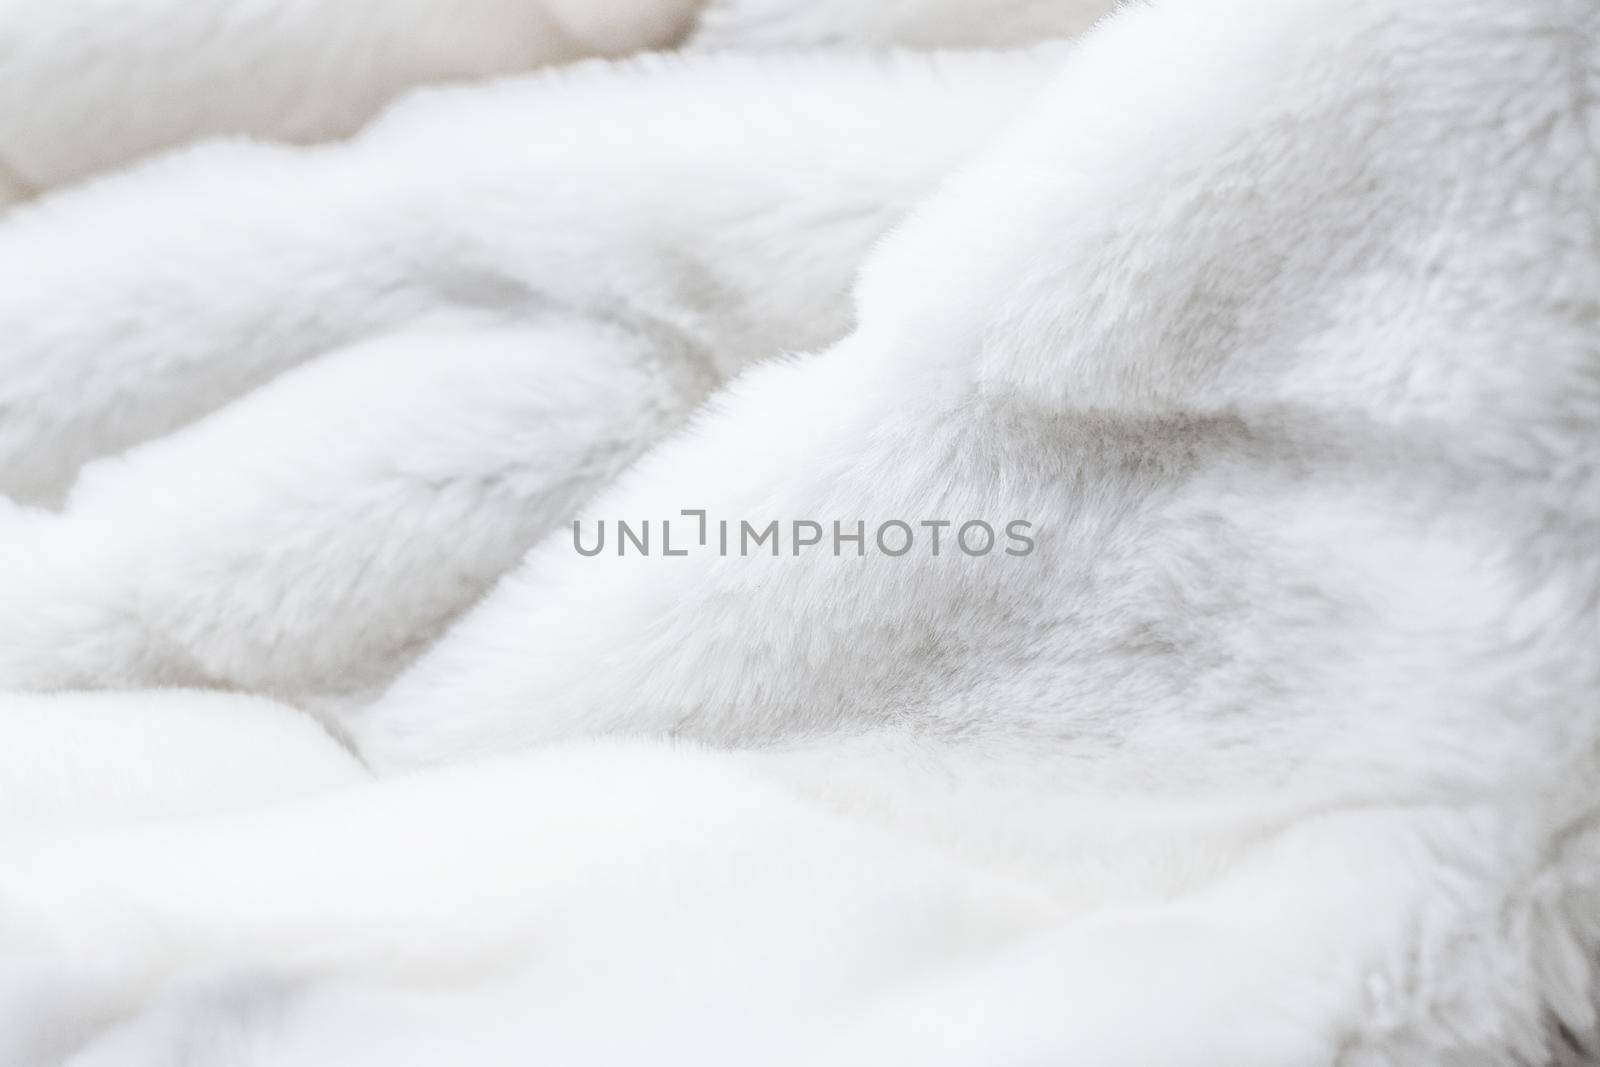 Fashion design, warm winter clothing and vintage material concept - Luxury white fur coat texture background, artificial fabric detail